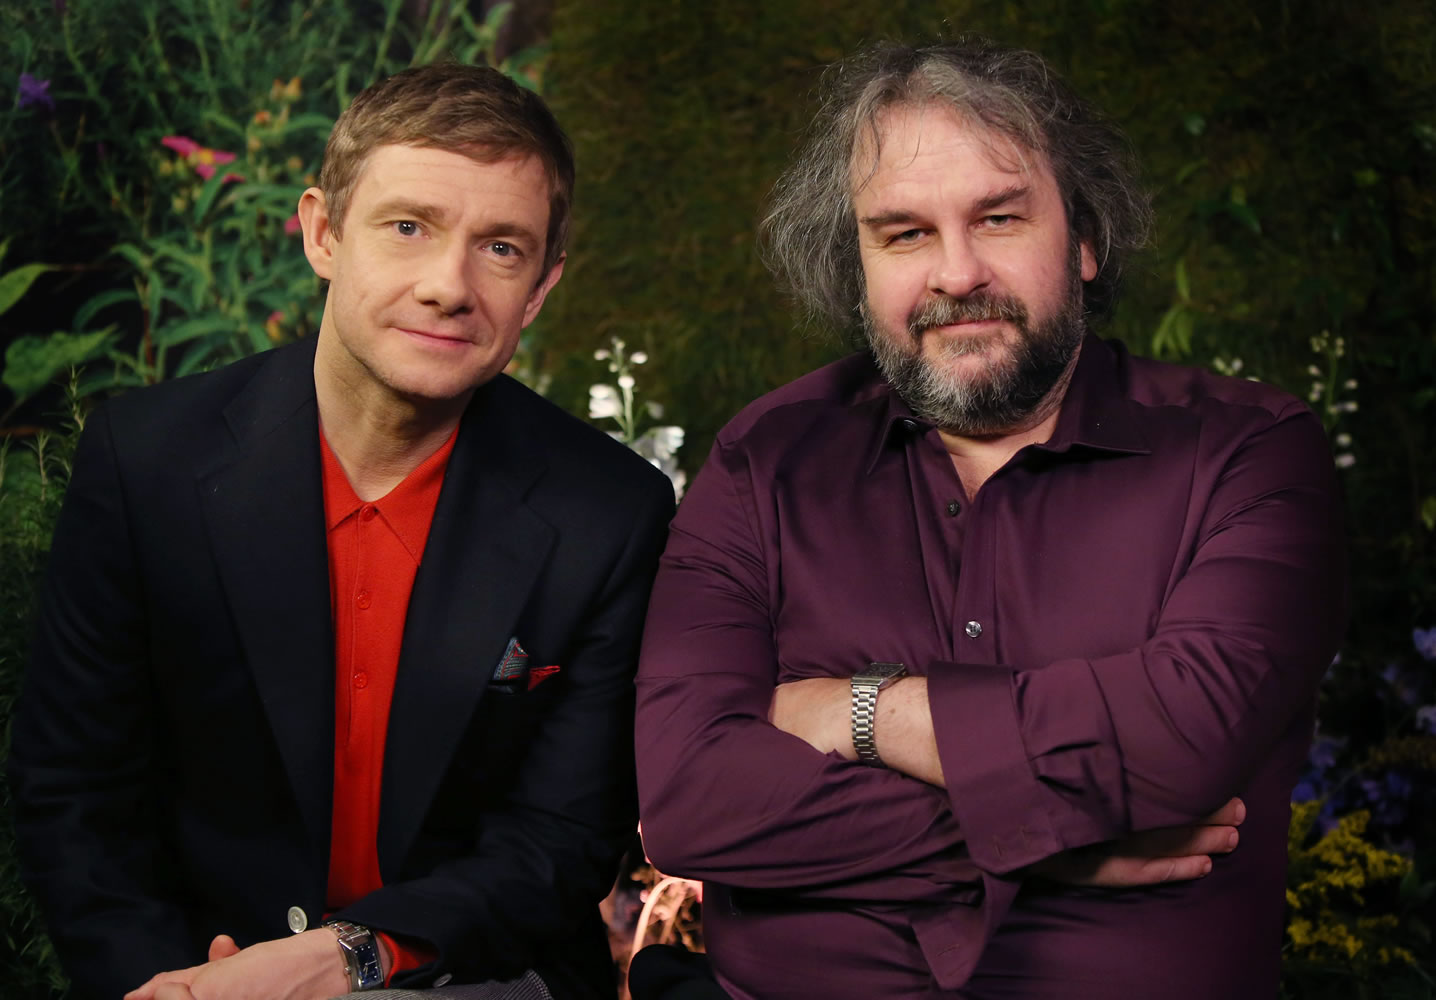 British actor Martin Freeman, left, and director Peter Jackson from New Zealand pose for photographs Dec. 1 in the Claridges suite in west London. Freeman stars at Bilbo Baggins in &quot;The Hobbit, Battle of the Five Armies,&quot; the final film in Jackson's &quot;Hobbit&quot; trilogy.